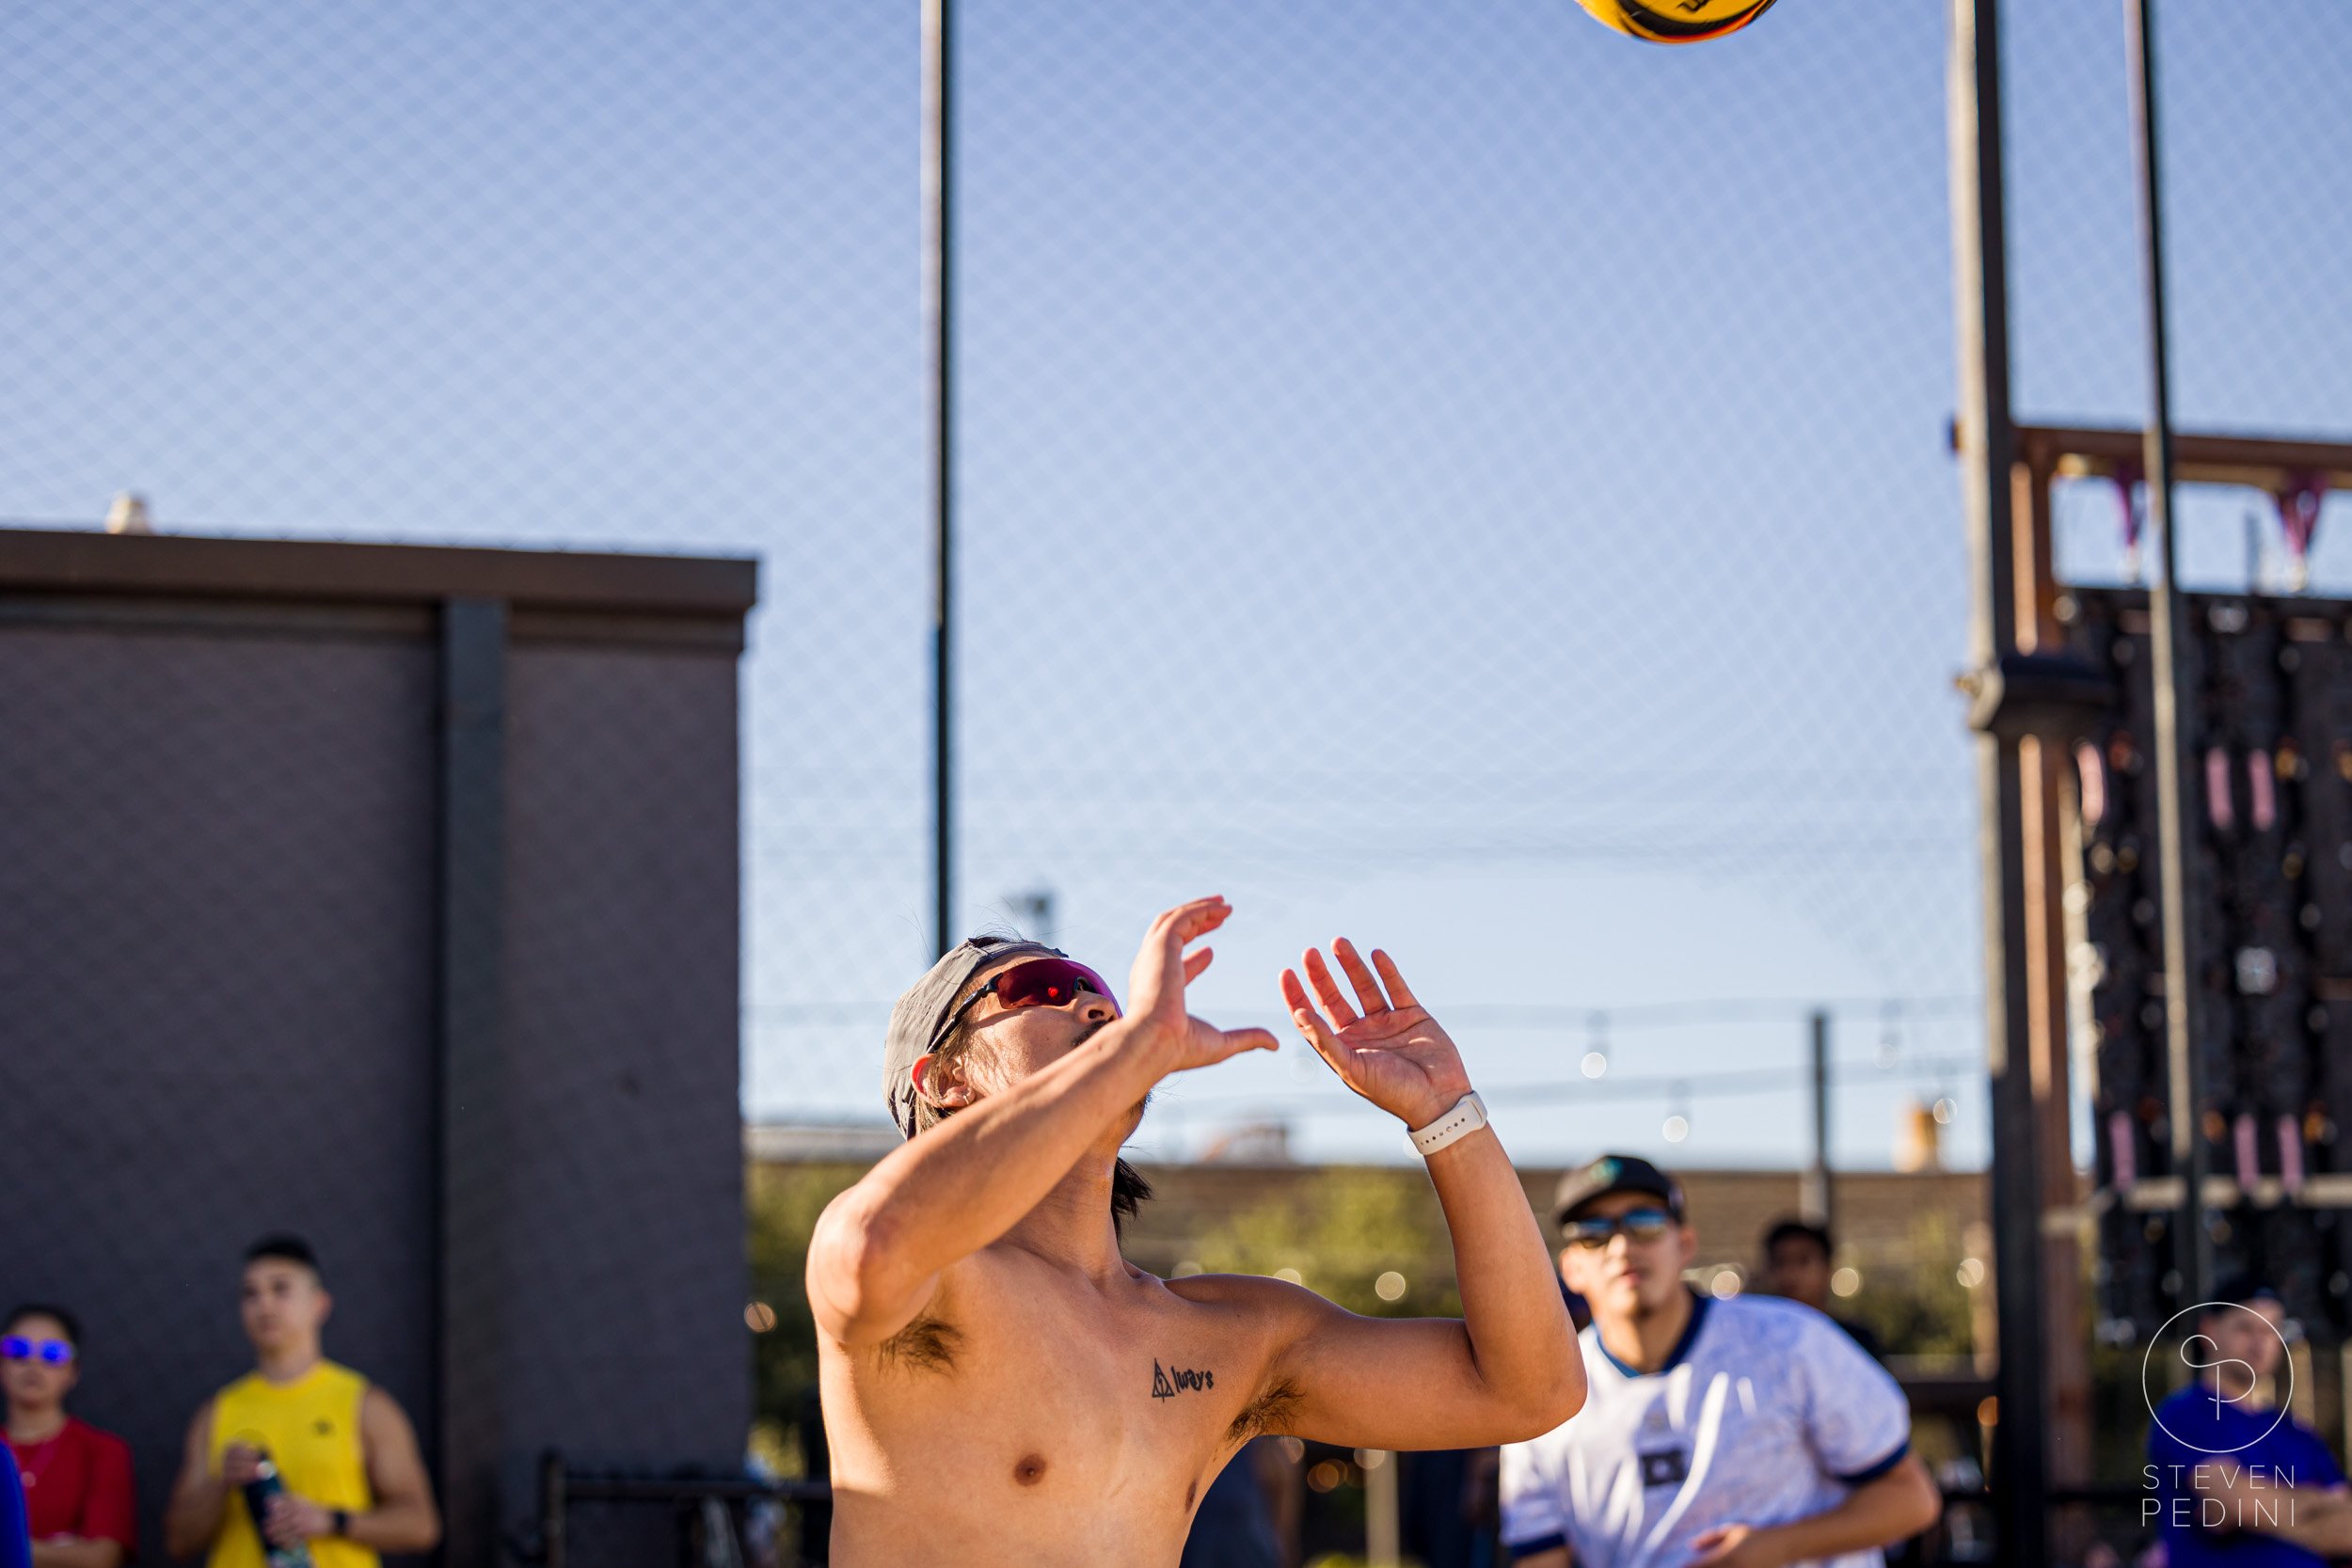 Steven Pedini Photography - Bumpy Pickle - Sand Volleyball - Houston TX - World Cup of Volleyball - 00085.jpg